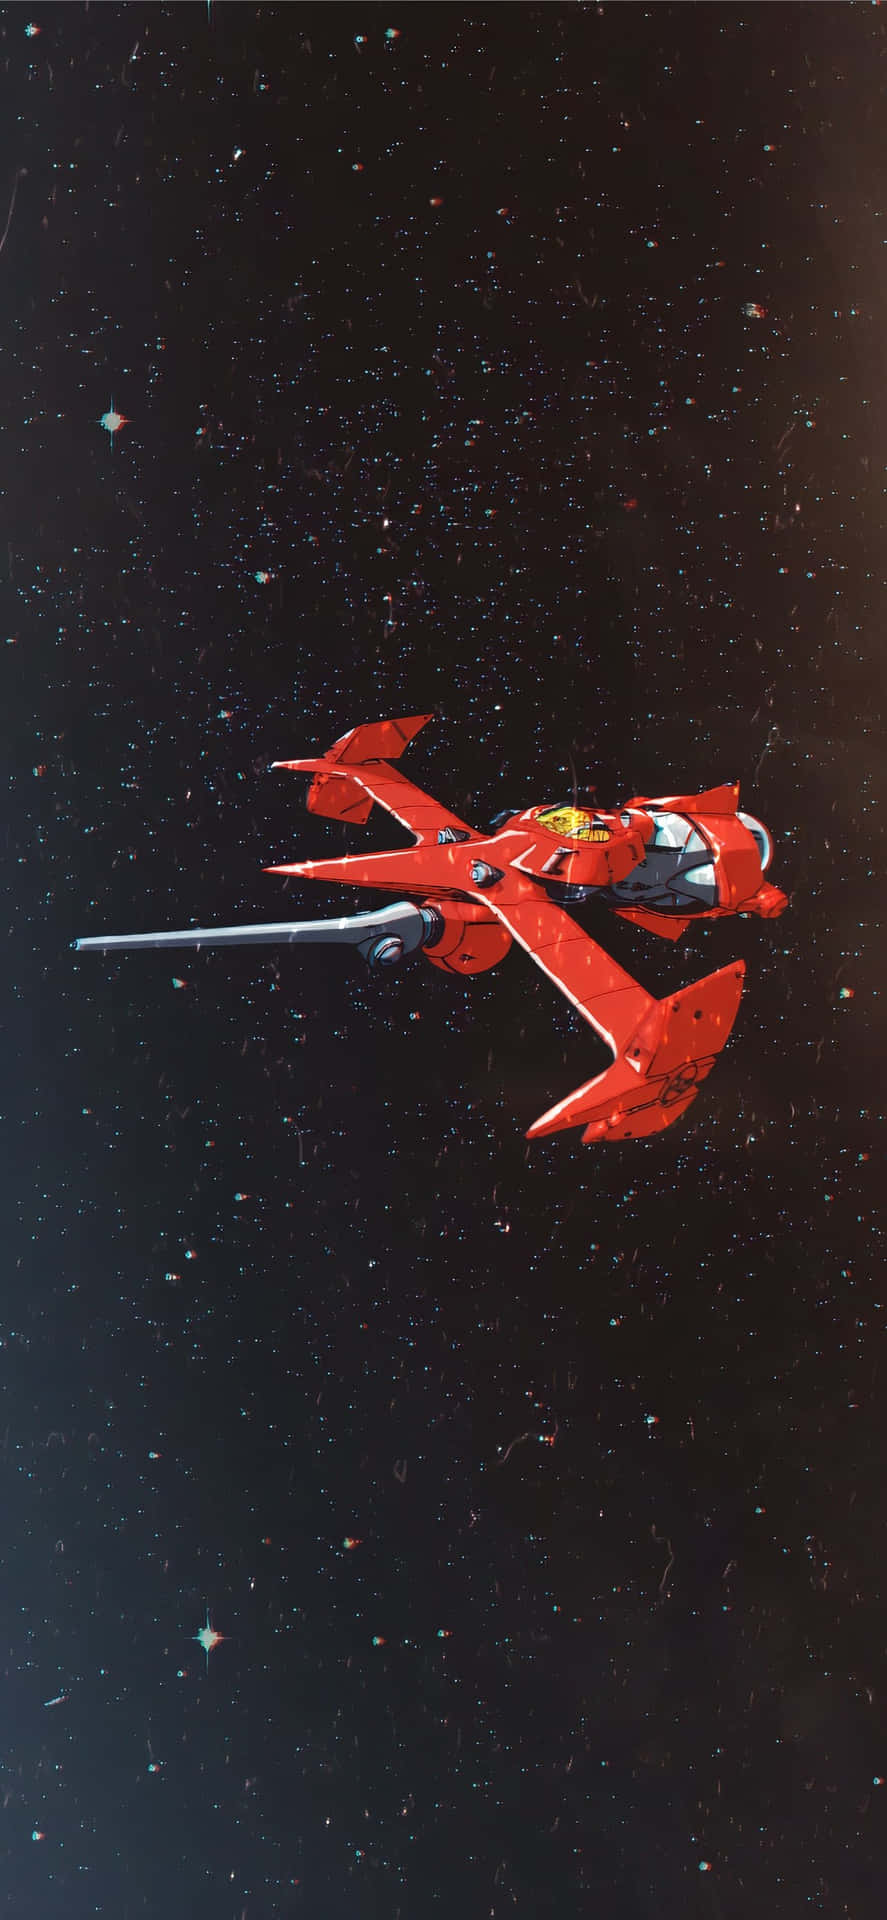 Fly Through the Spaceways with Cowboy Bebop on Your Iphone Wallpaper